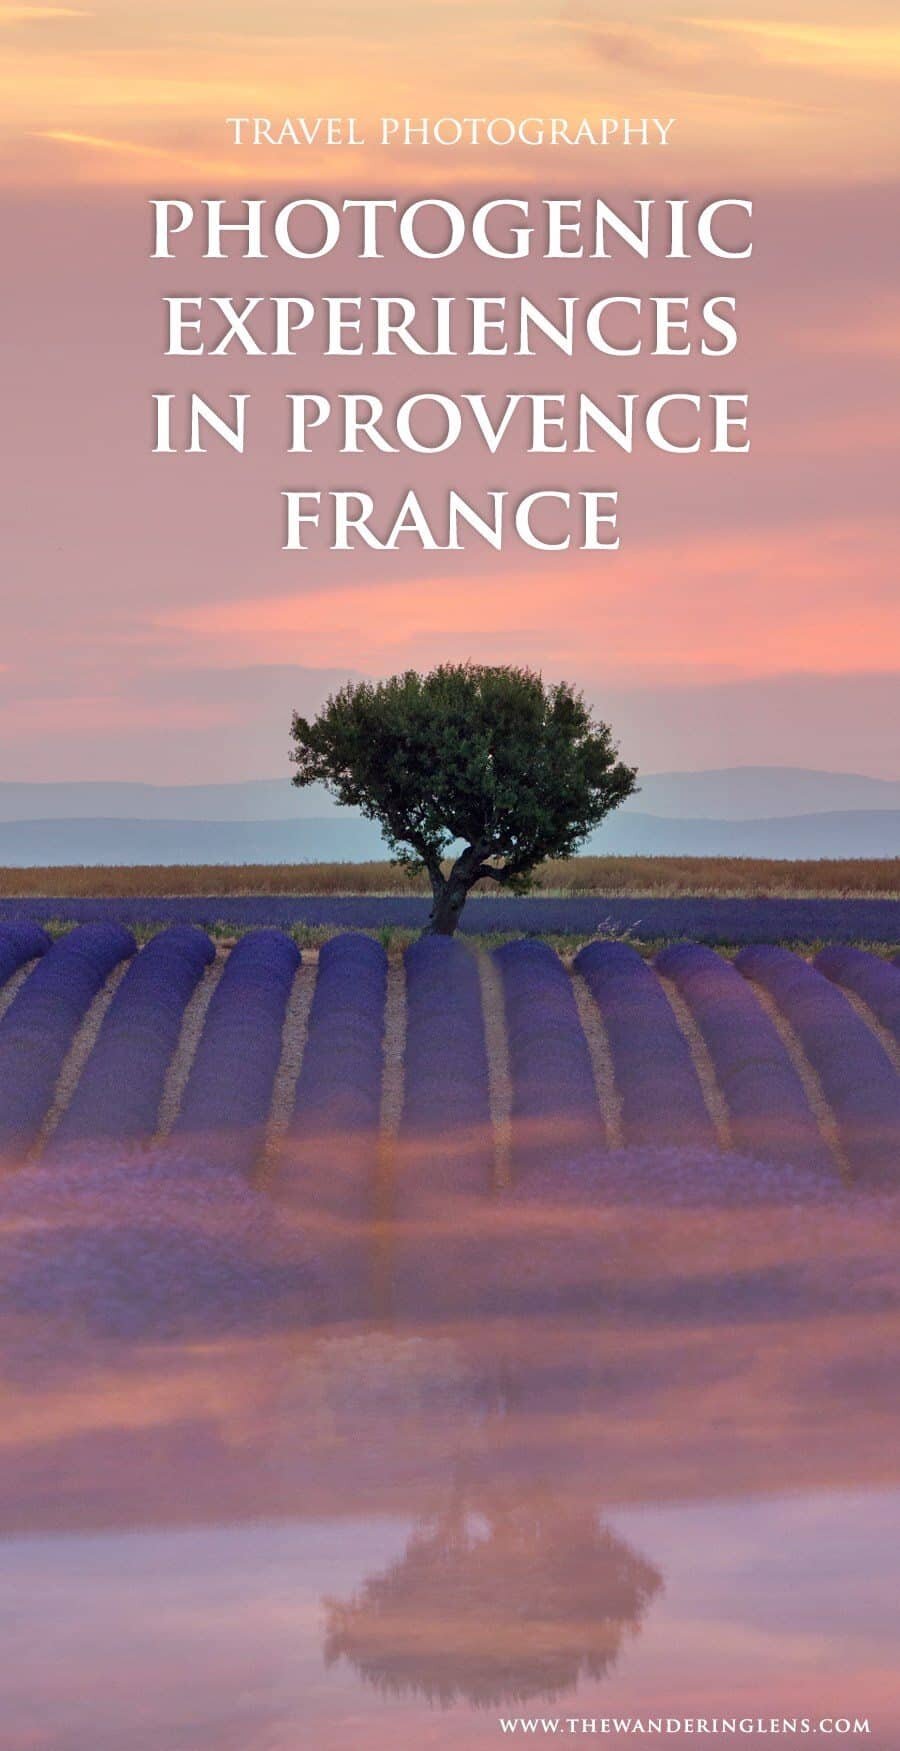 Places to Photograph in Provence, France by Photographer Lisa Michele Burns of The Wandering Lens www.thewanderinglens.com